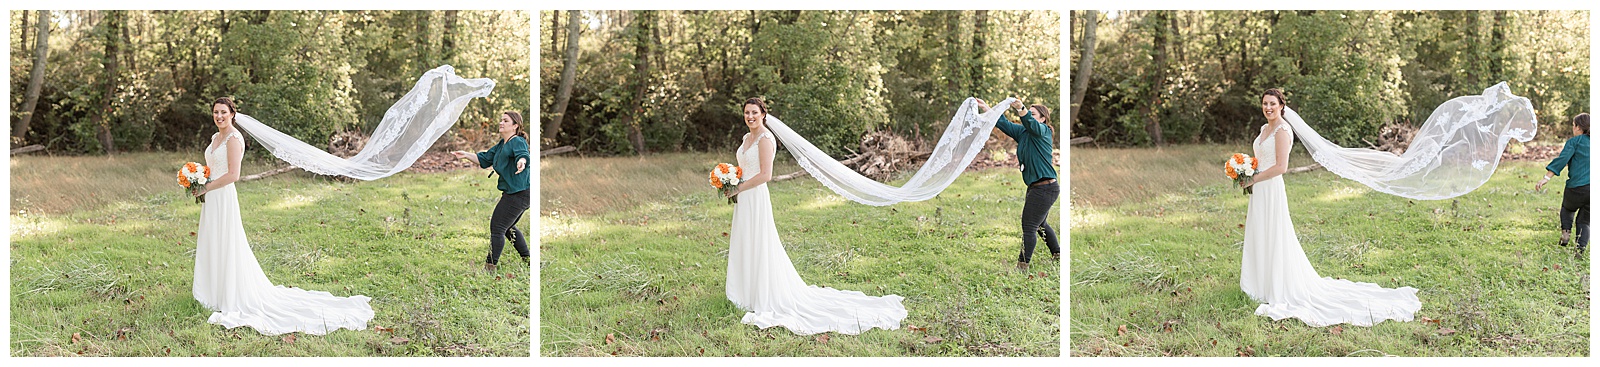 photographer fluffing very long bridal veil bride is wearing and raising it into the air for perfect photo moment